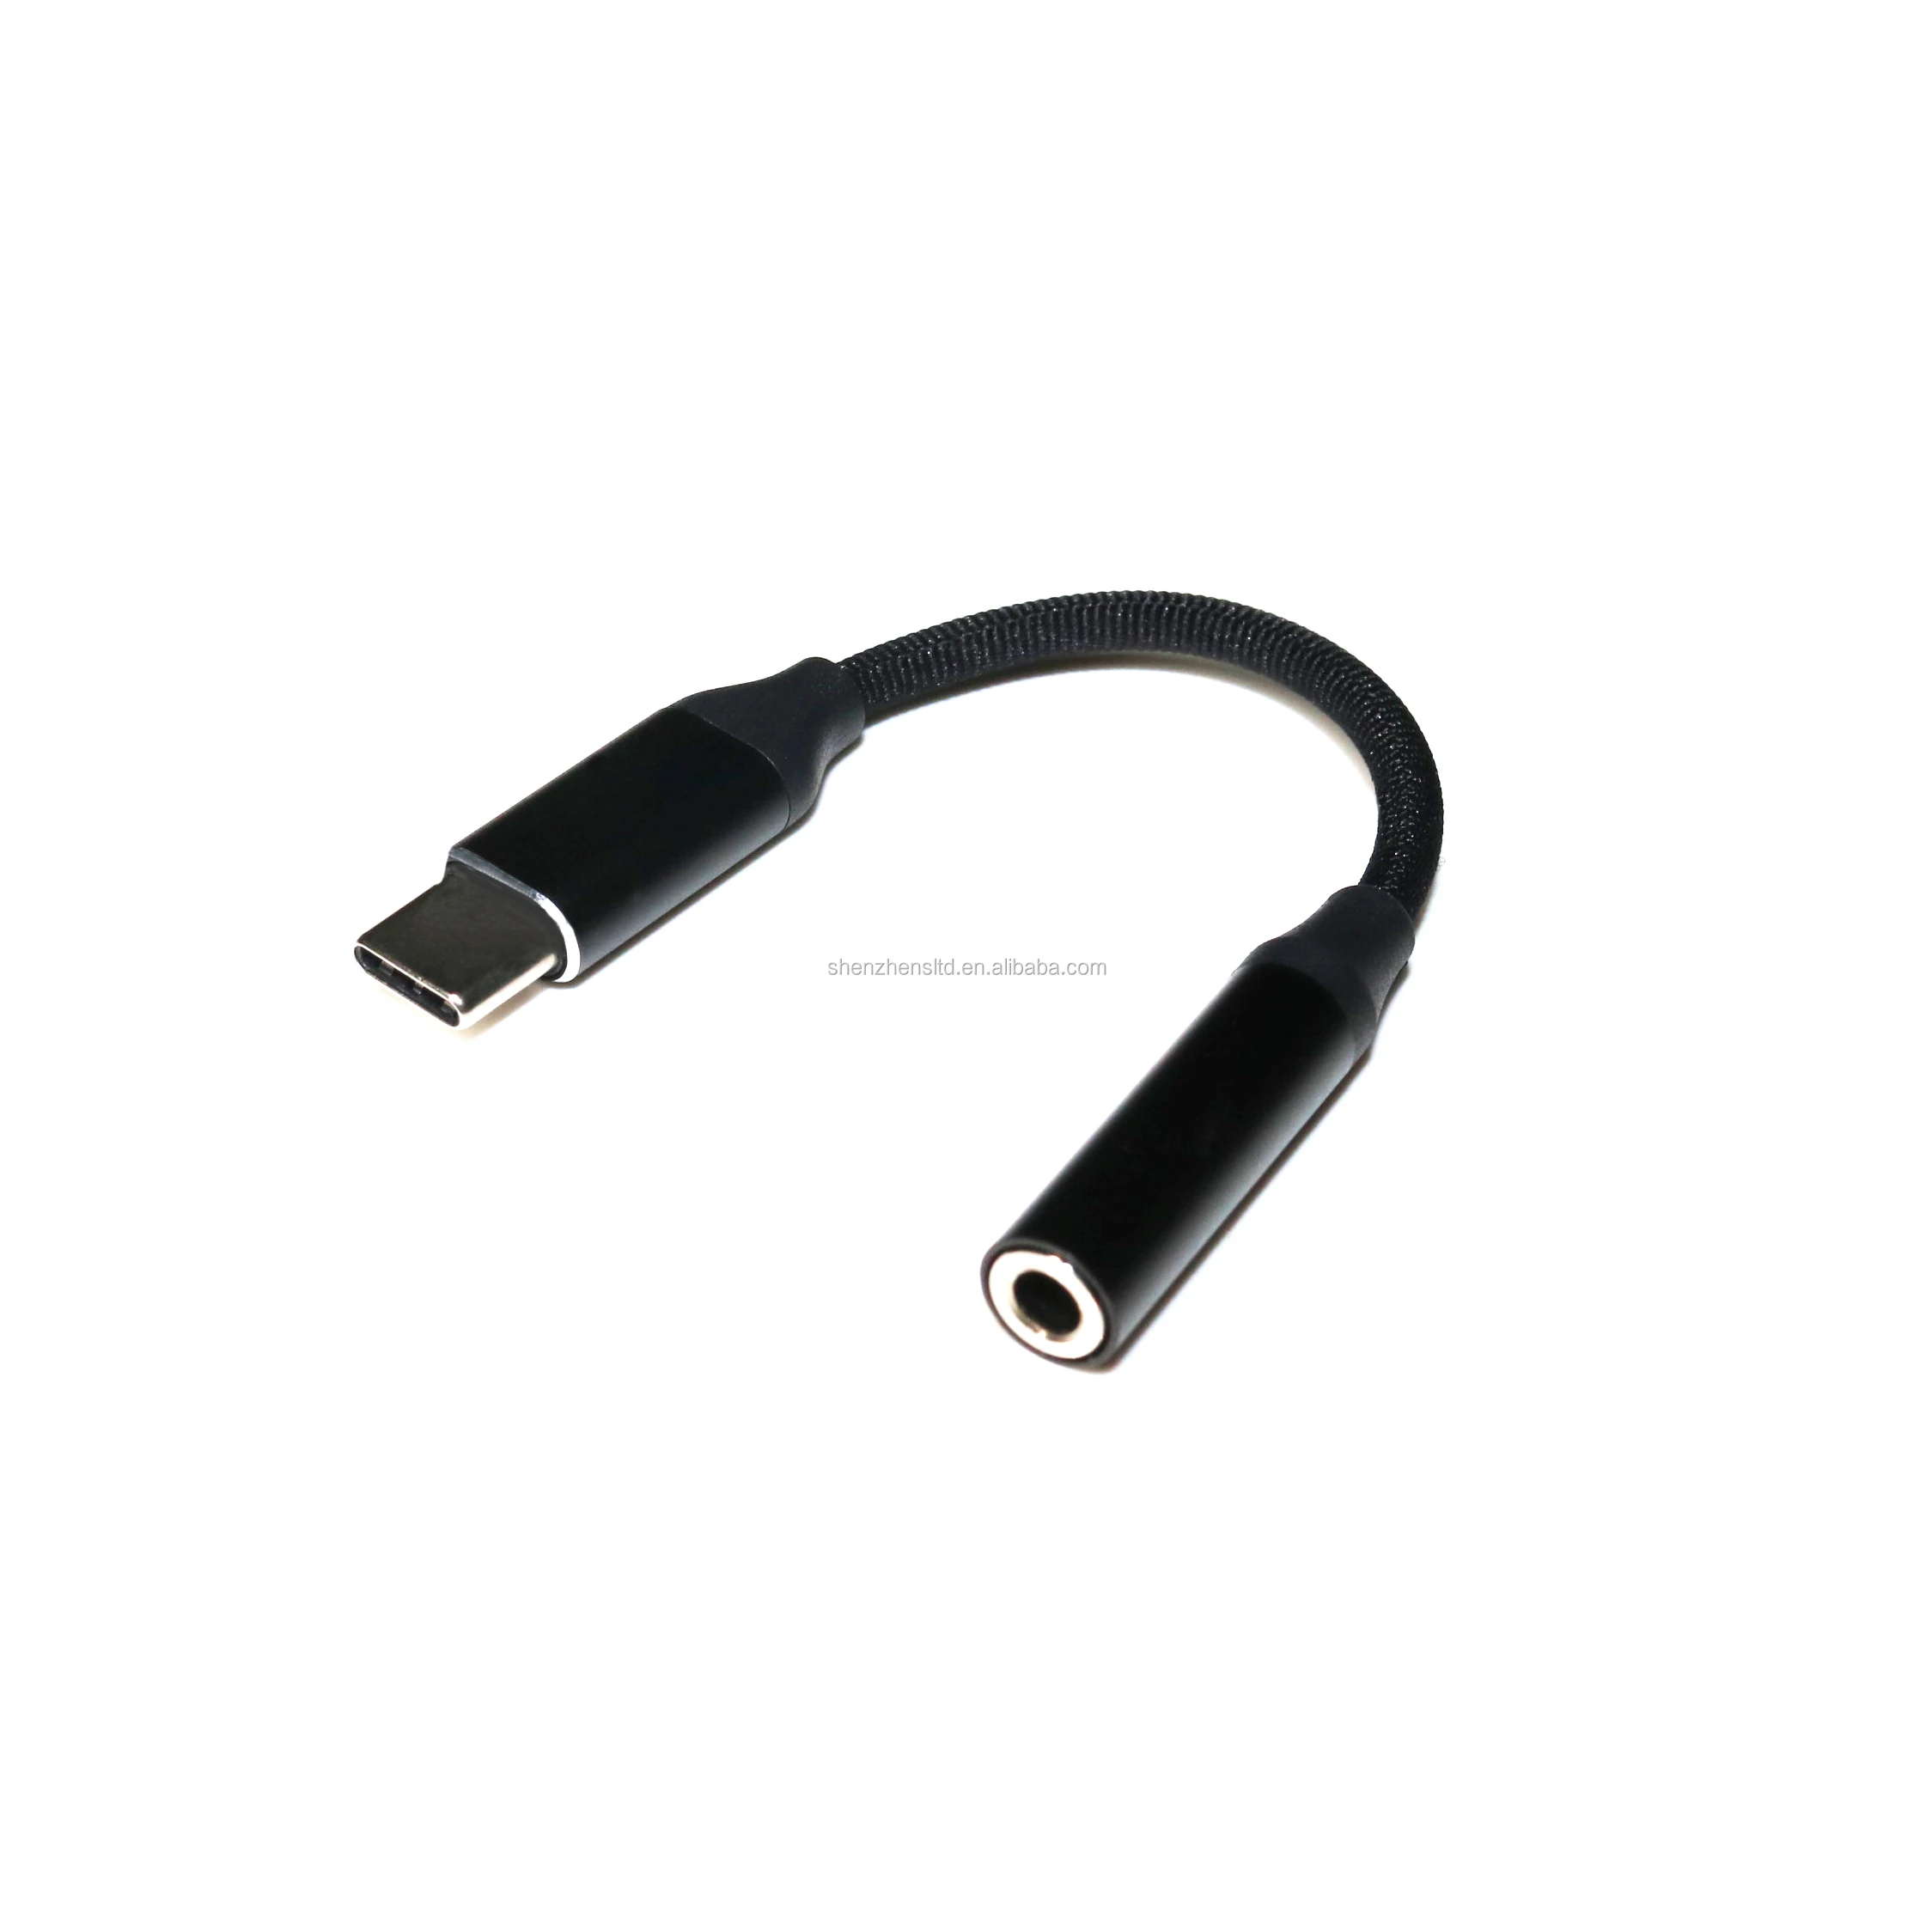 

type c to 3.5mm headphone jack adapter for Usb to 3.5mm jack audio adapter commonly used accessories & parts, Black, grey